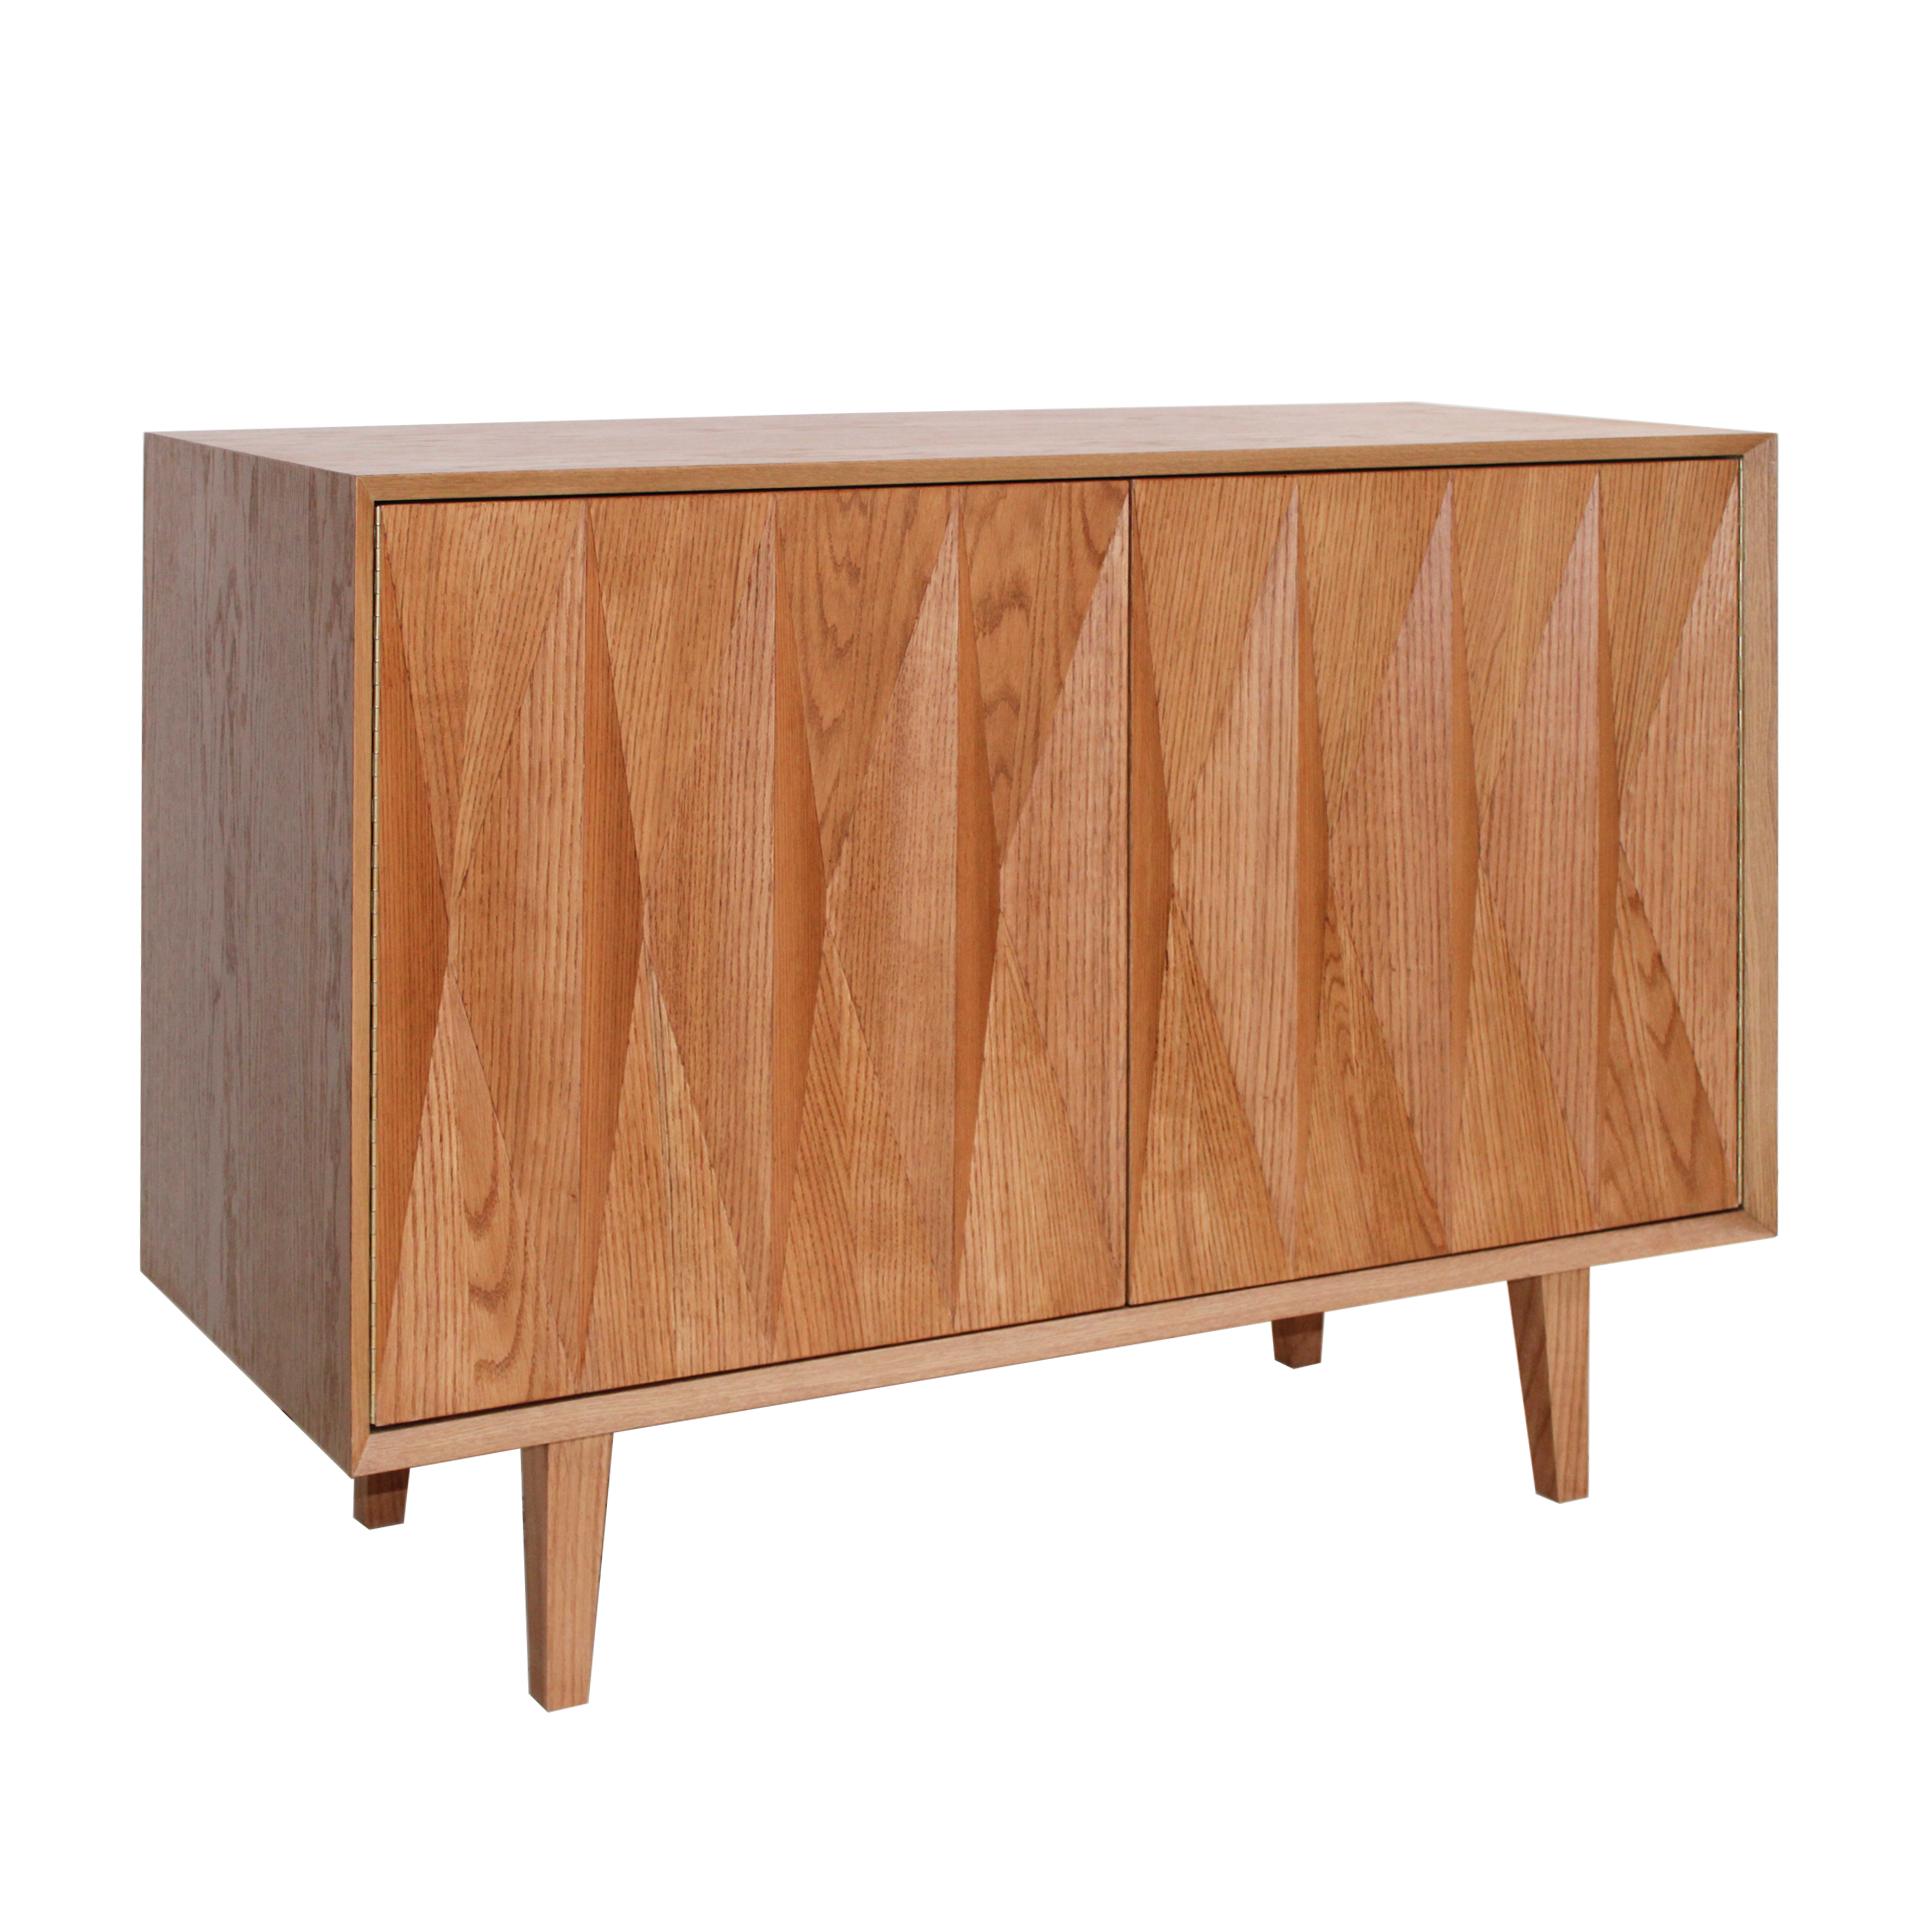 Mid-Century Modern Style Oak Wood Pair of Italian Sideboards by L.a Studio In Good Condition For Sale In Ibiza, Spain